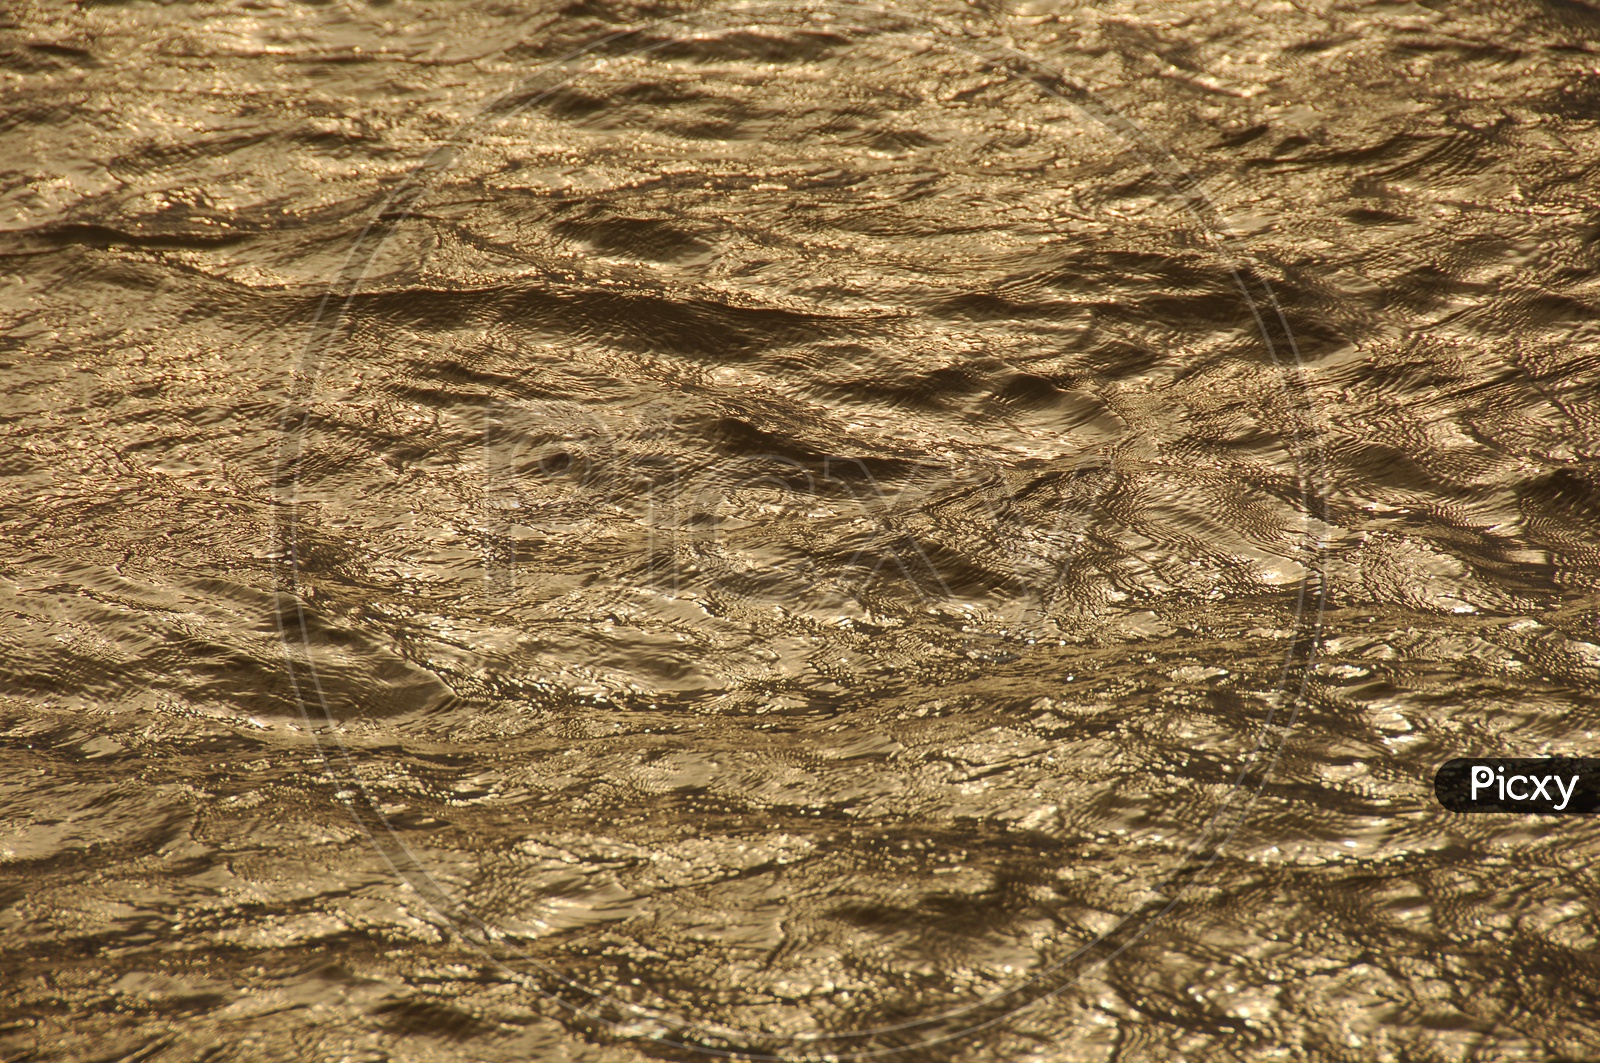 Texture Of Water Ripples on a Water Surface